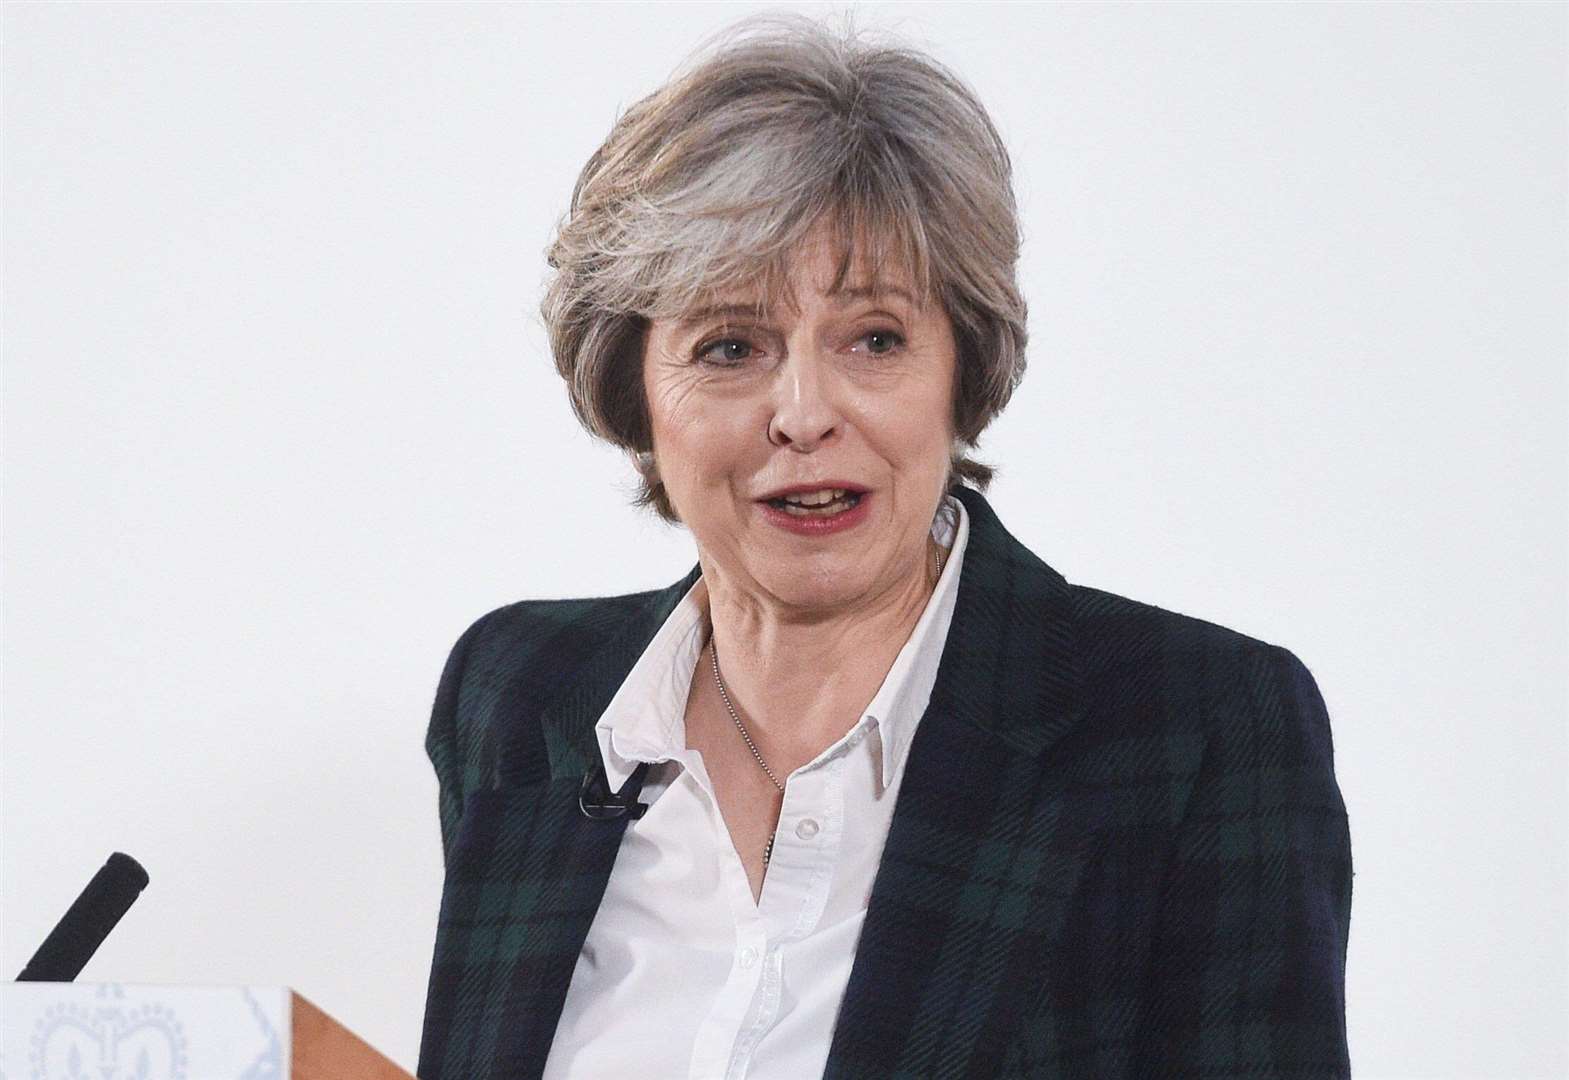 Prime Minister Theresa May has been encouraged to drop her Chequers plan by Conservative association chairmen in Kent